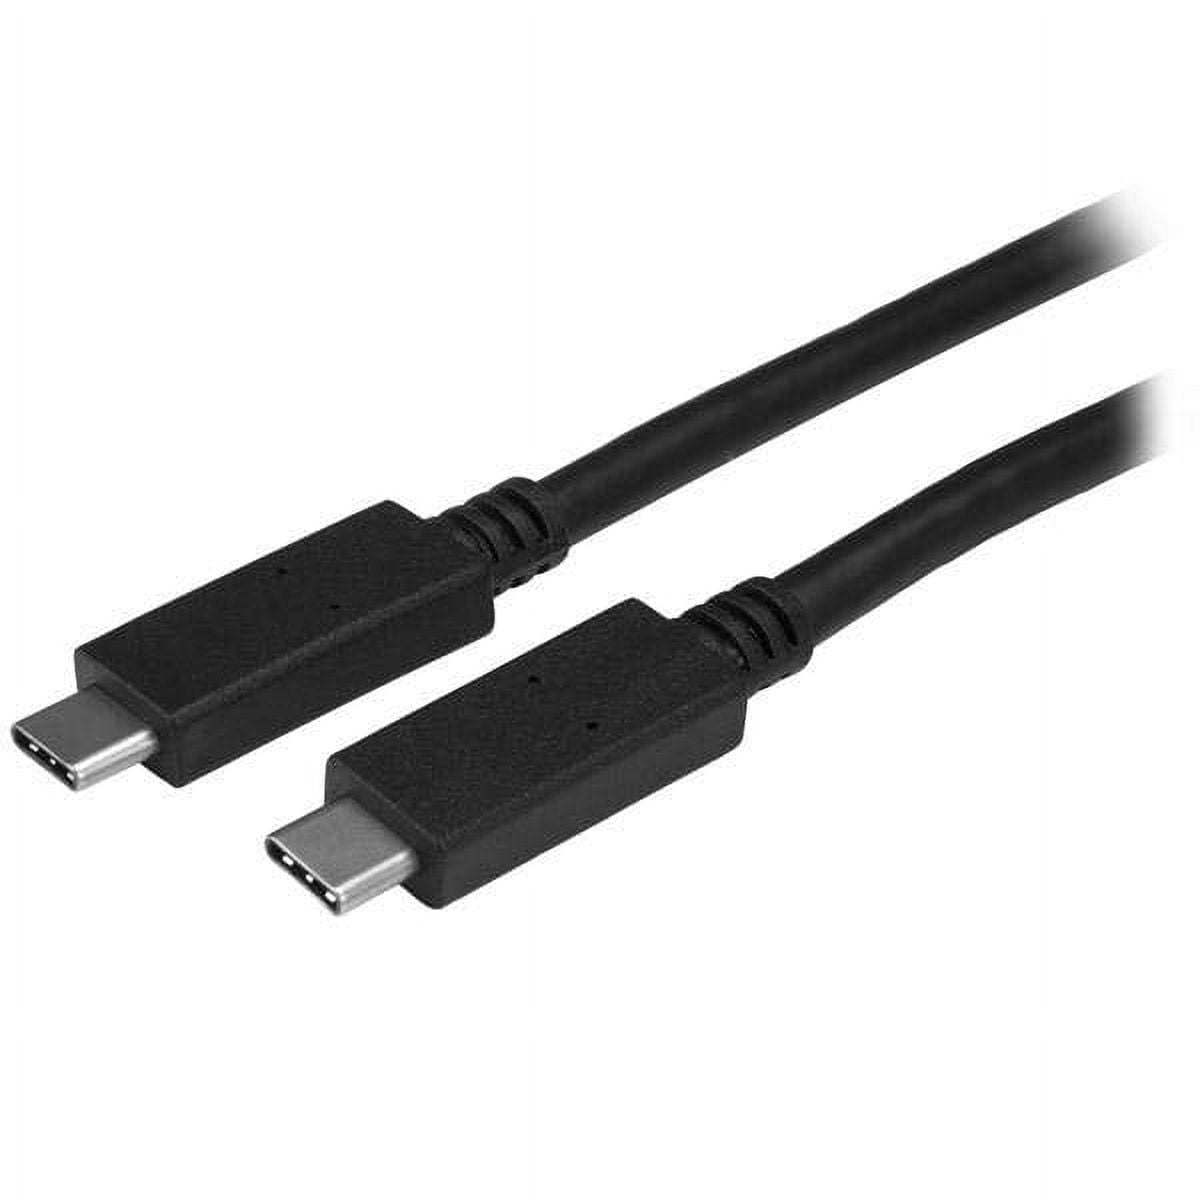 FD1 USB Type C Cable 2 A 1.6 m New Retractable 3in1 2in1 USB Type C Micro  USB 8 Pin Cable - FD1 